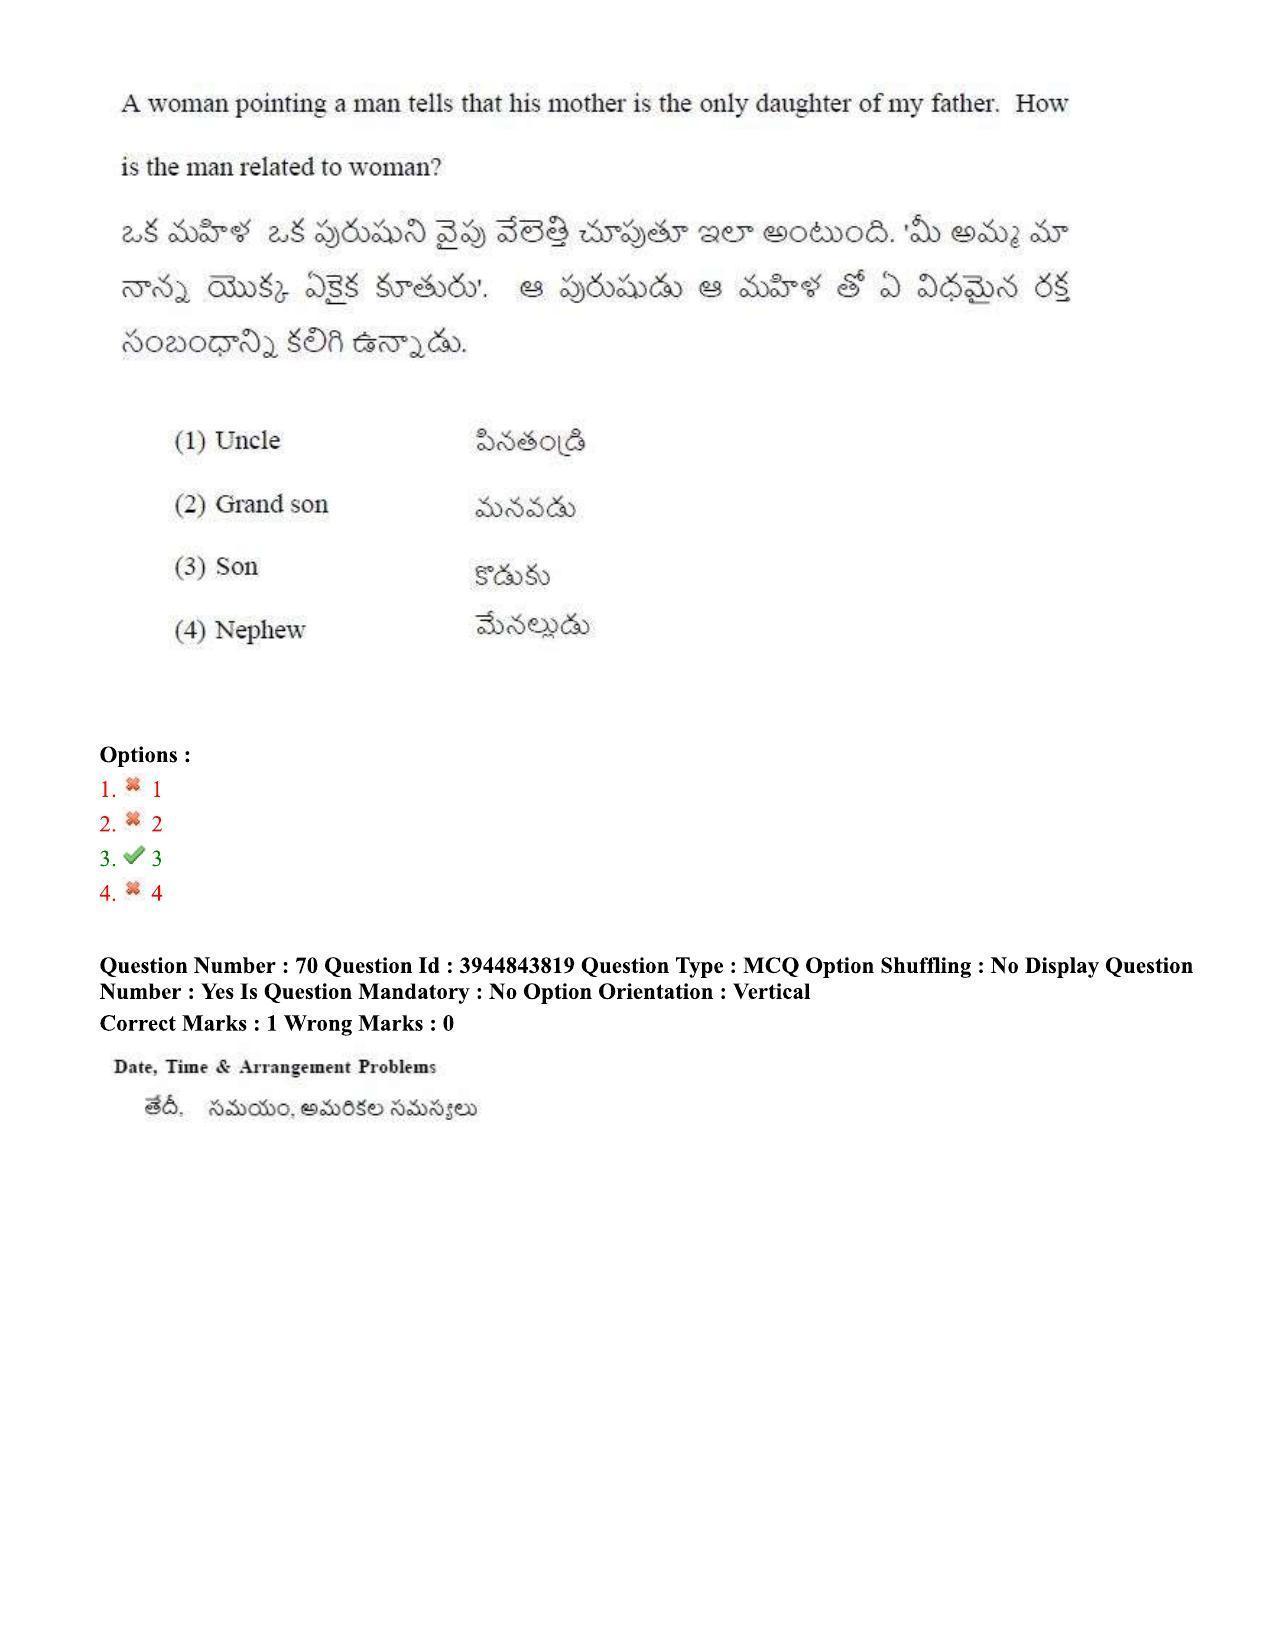 TS ICET 2020 Question Paper 1 - Oct 1, 2020	 - Page 52